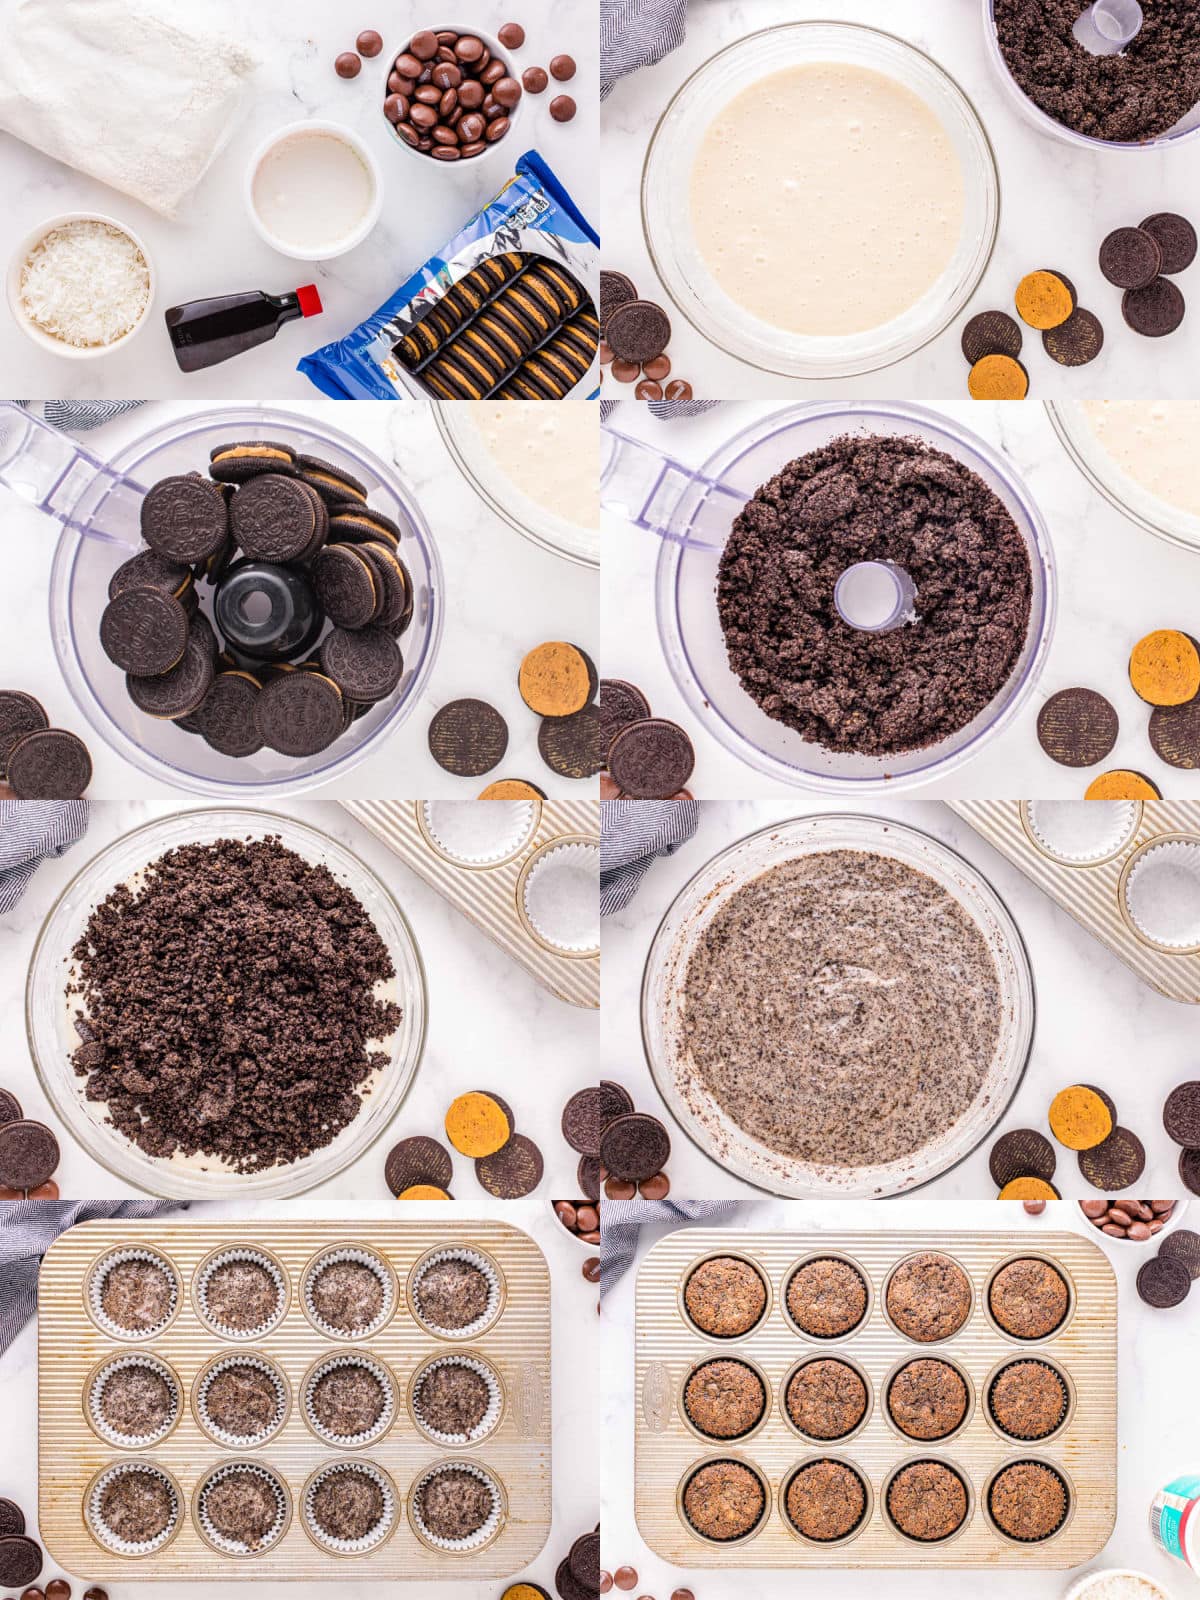 8 image collage showing how to make the oreo cupcakes and bake them.